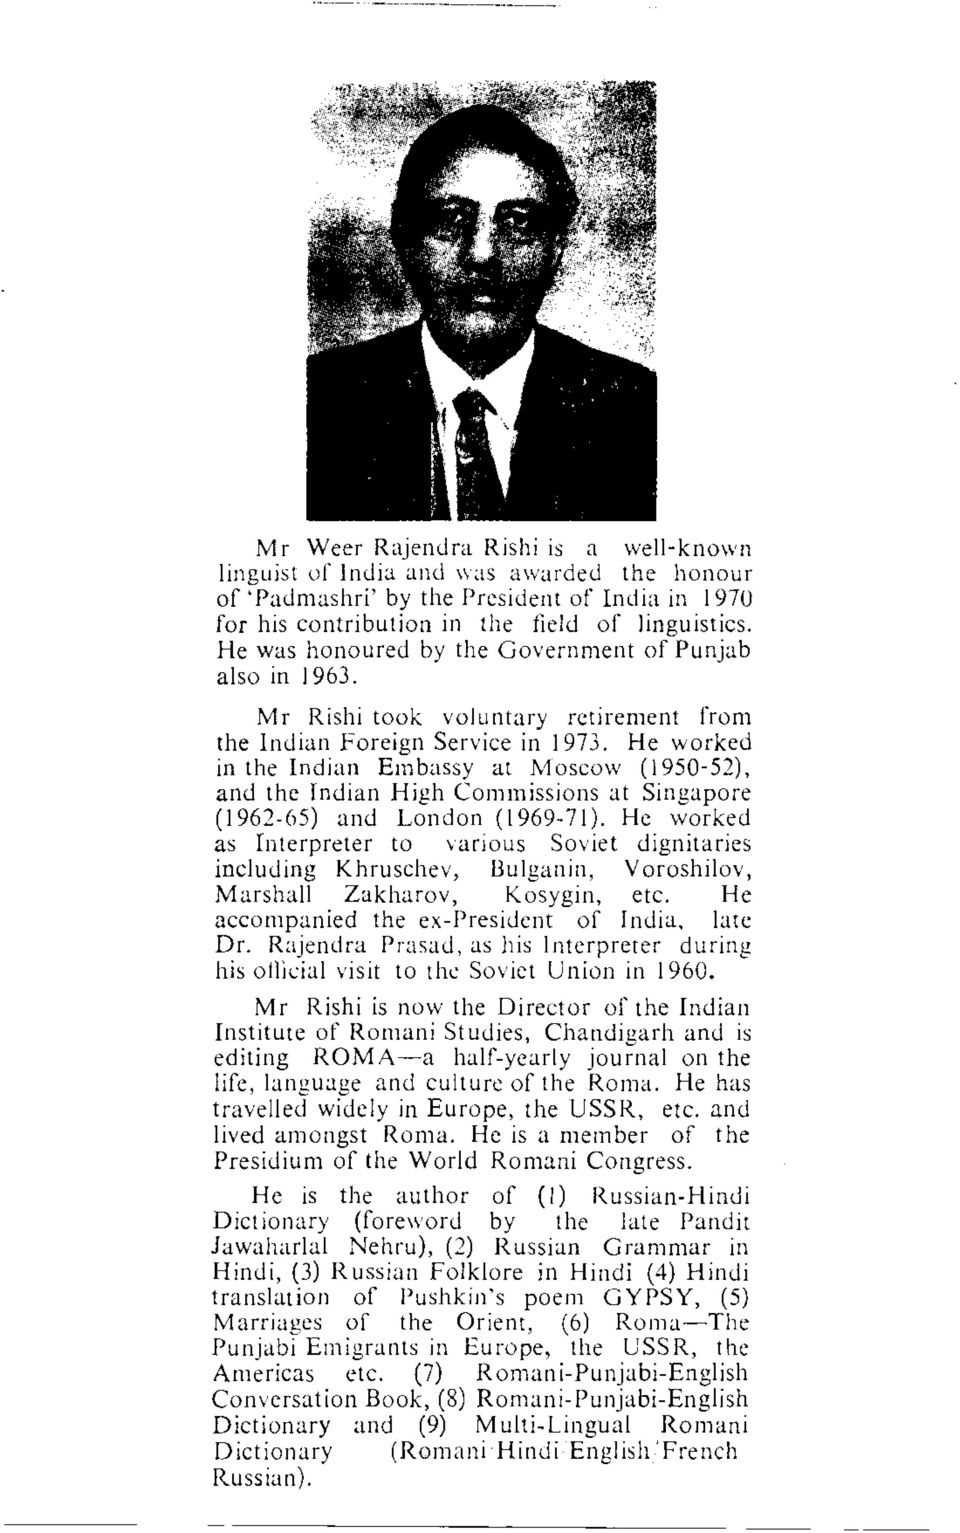 Mr Rishi took voluntary retirement from the Indian Foreign Service in 1973, He worked in the Indian Embassy at Moscow (1950-52), and the Indian High Commissions at Singapore (1962-65) and London